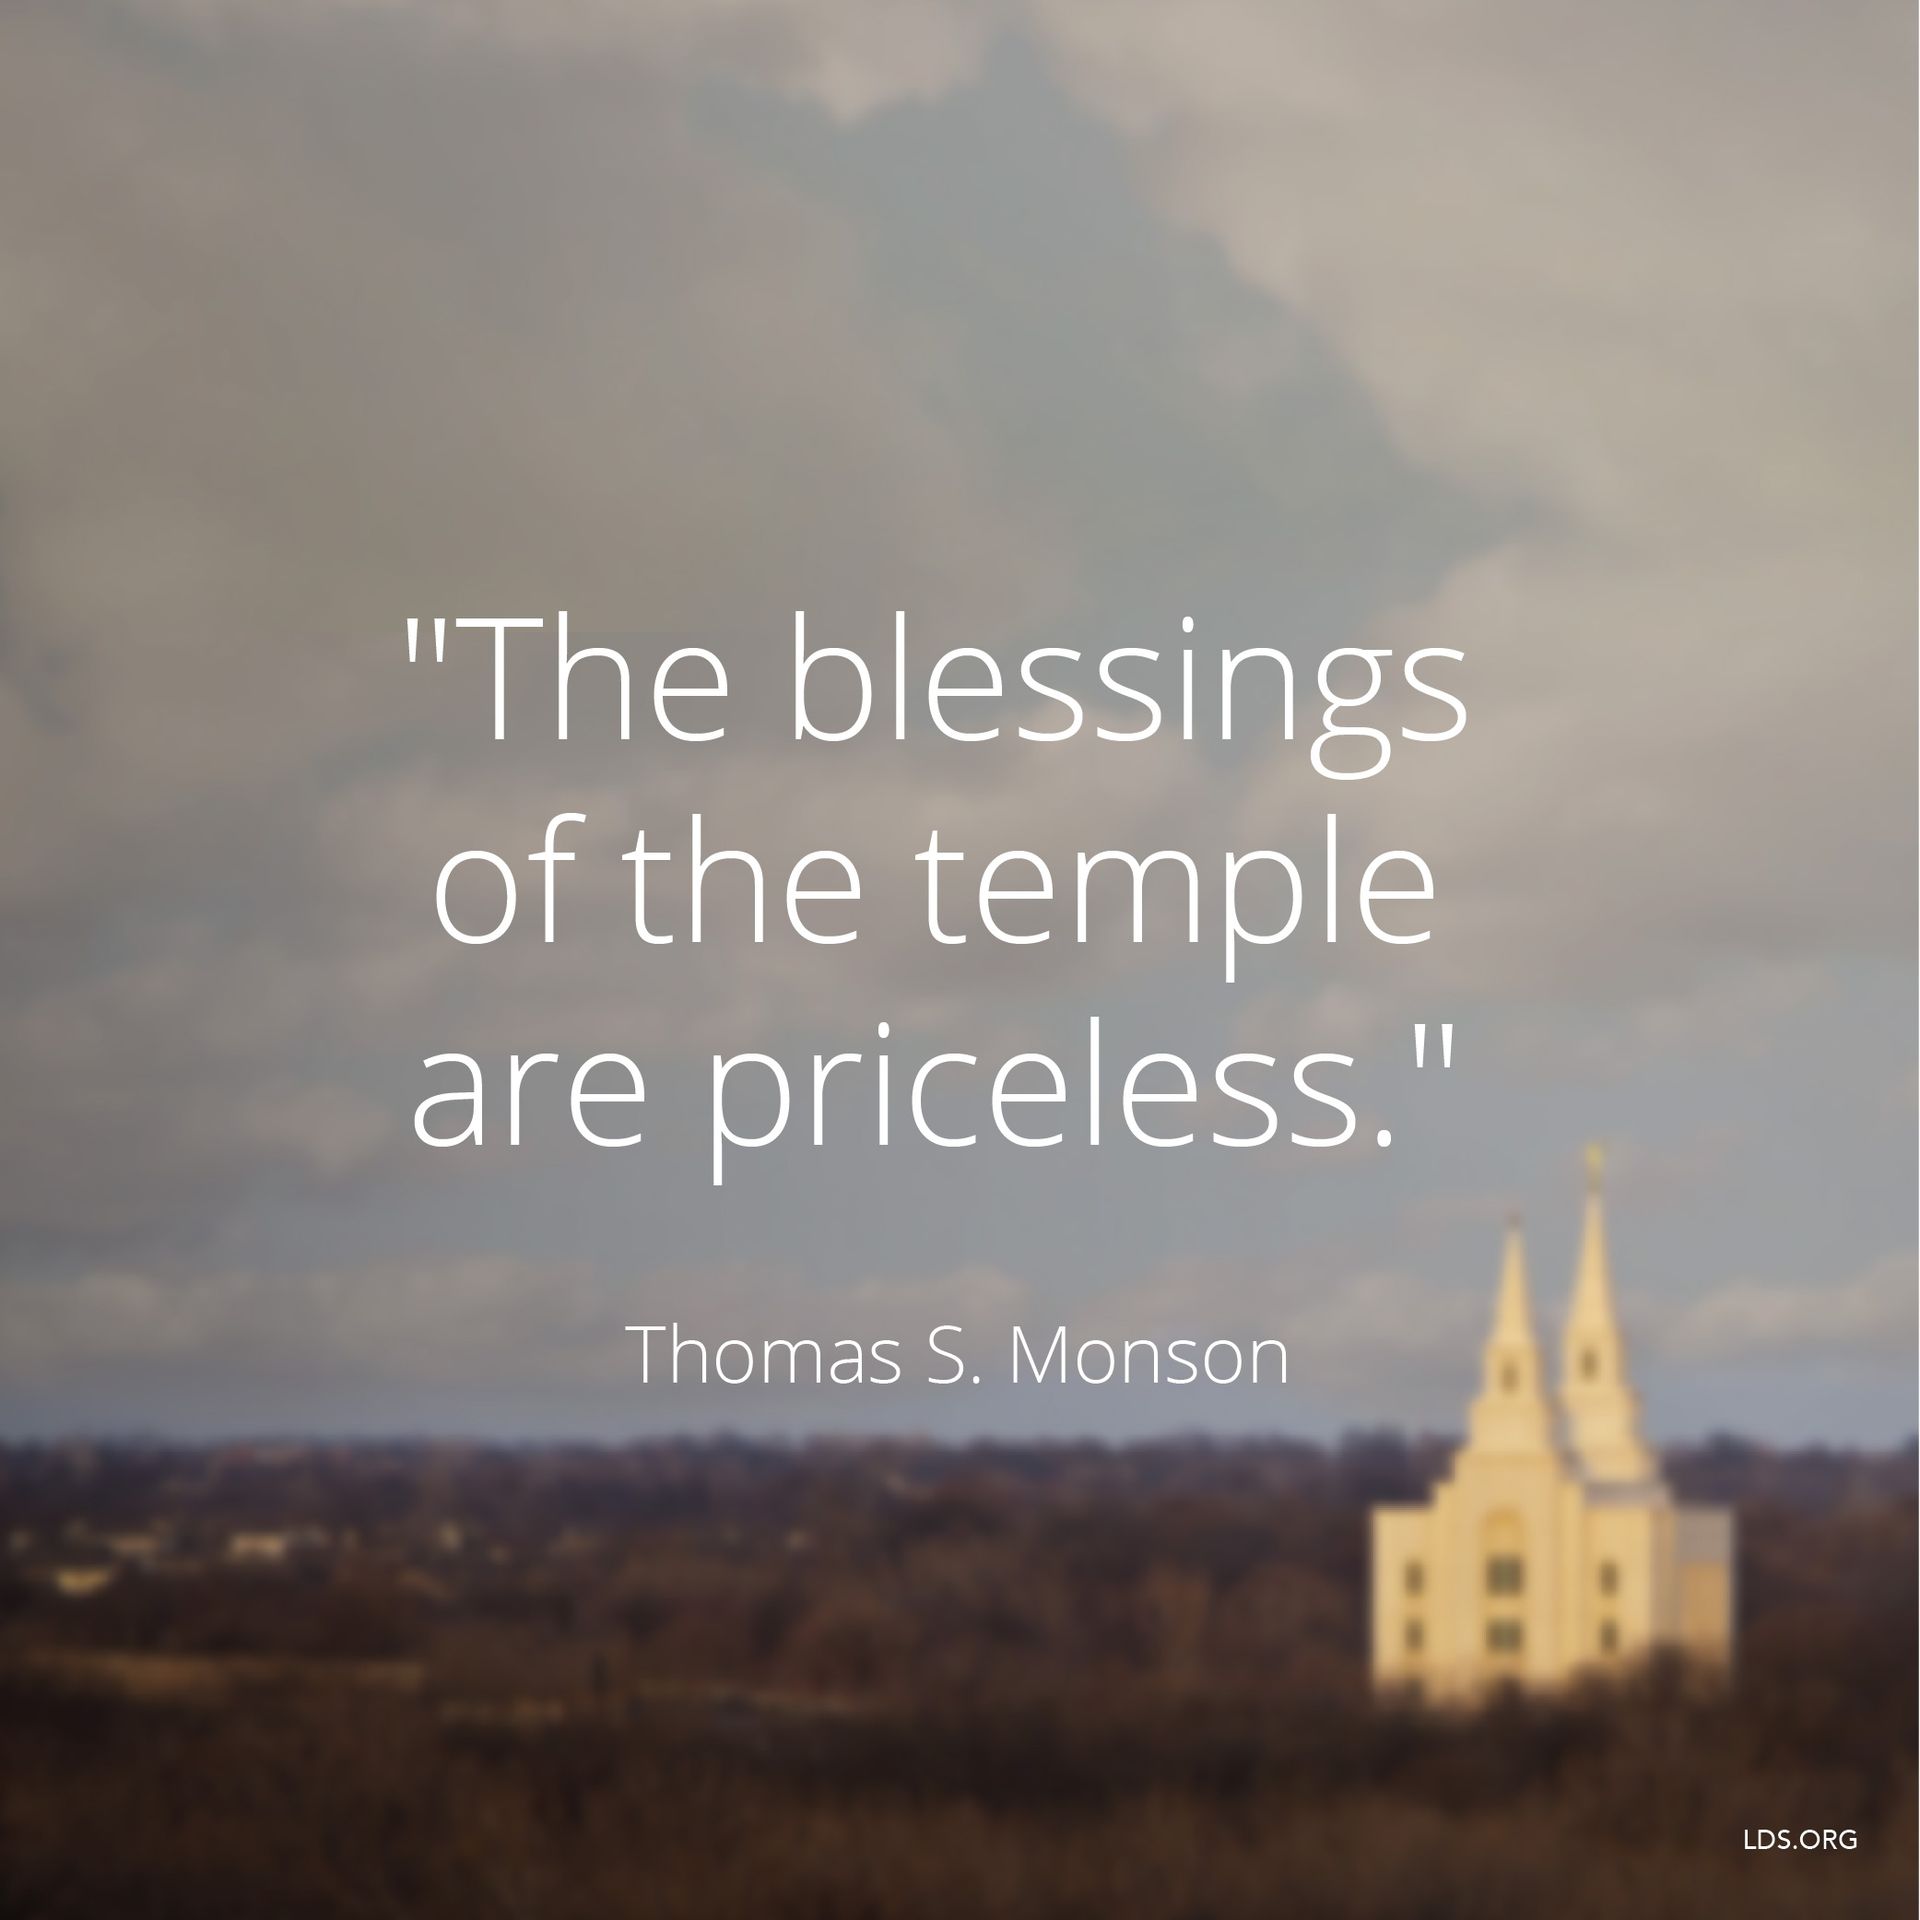 “The blessings of the temple are priceless.”—President Thomas S. Monson, “Blessings of the Temple” © undefined ipCode 1.